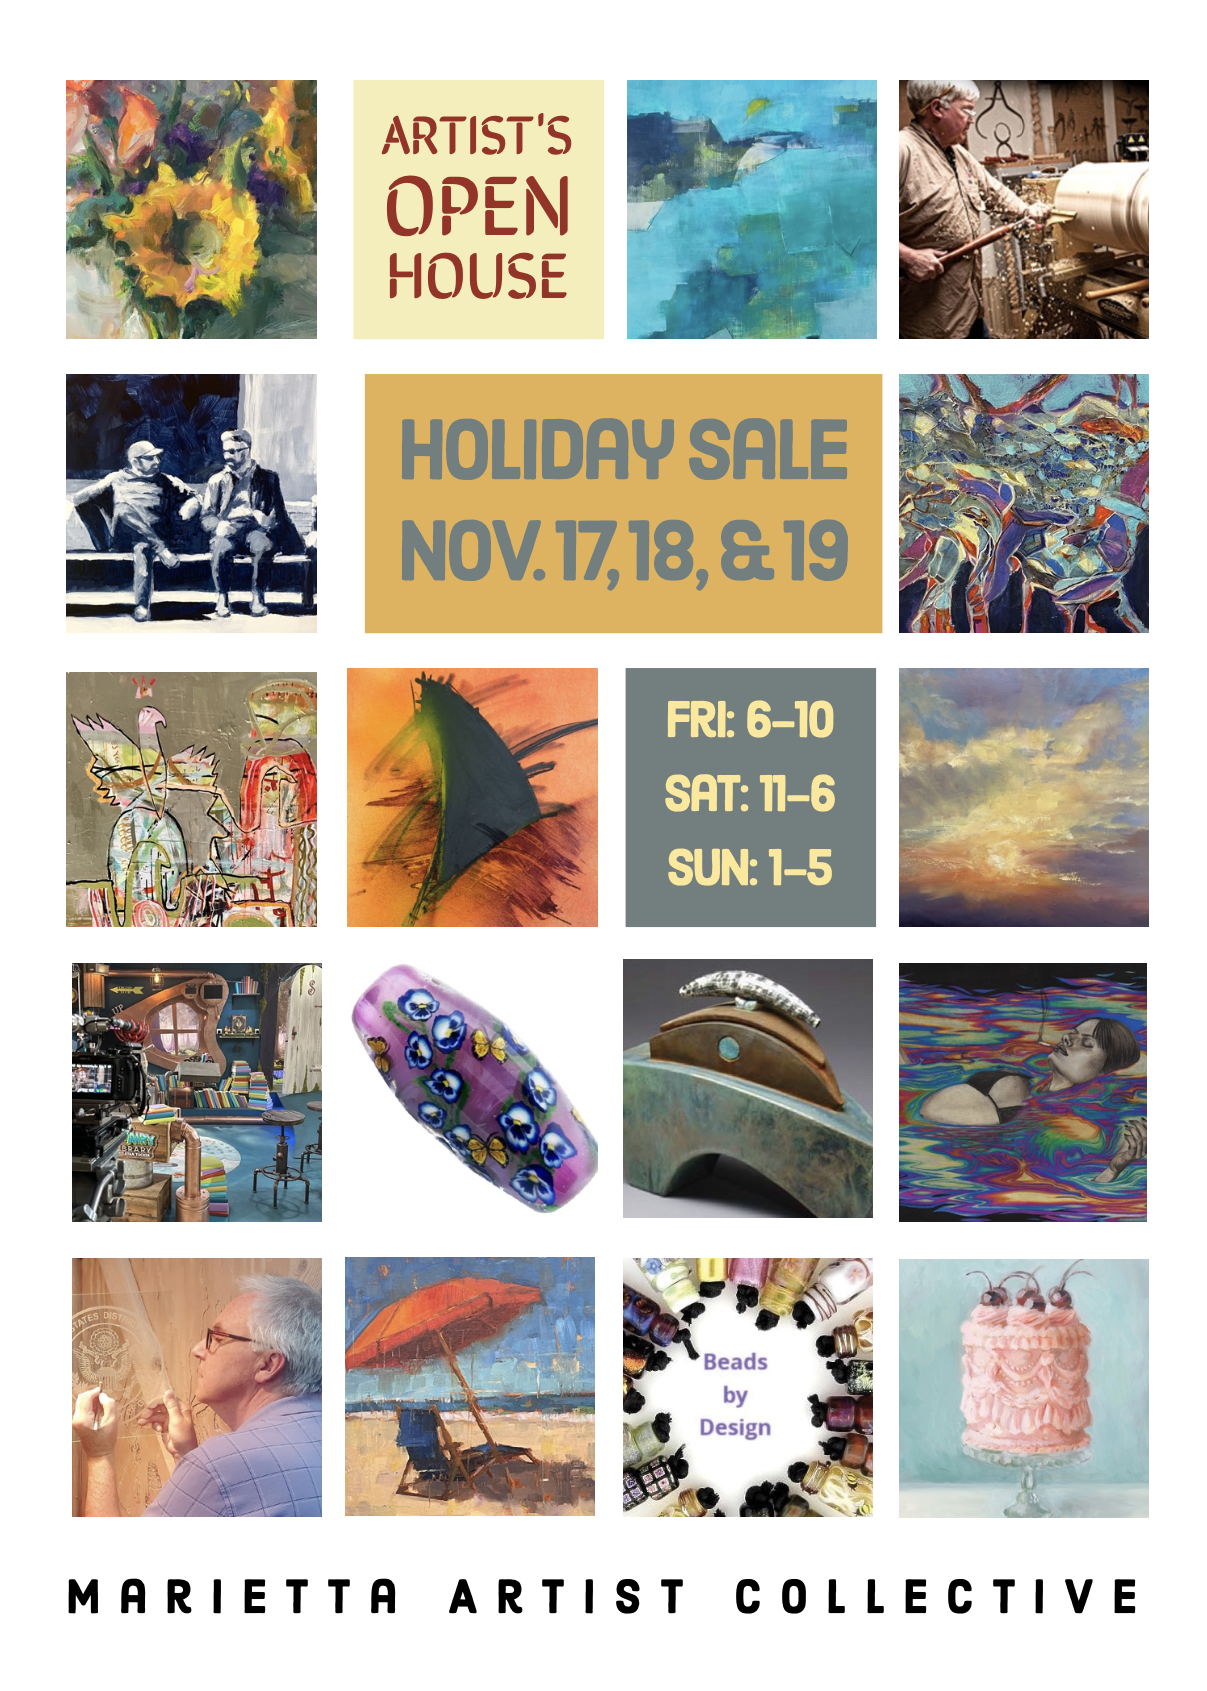 Marietta Artist Collective Holiday Open House and Sale